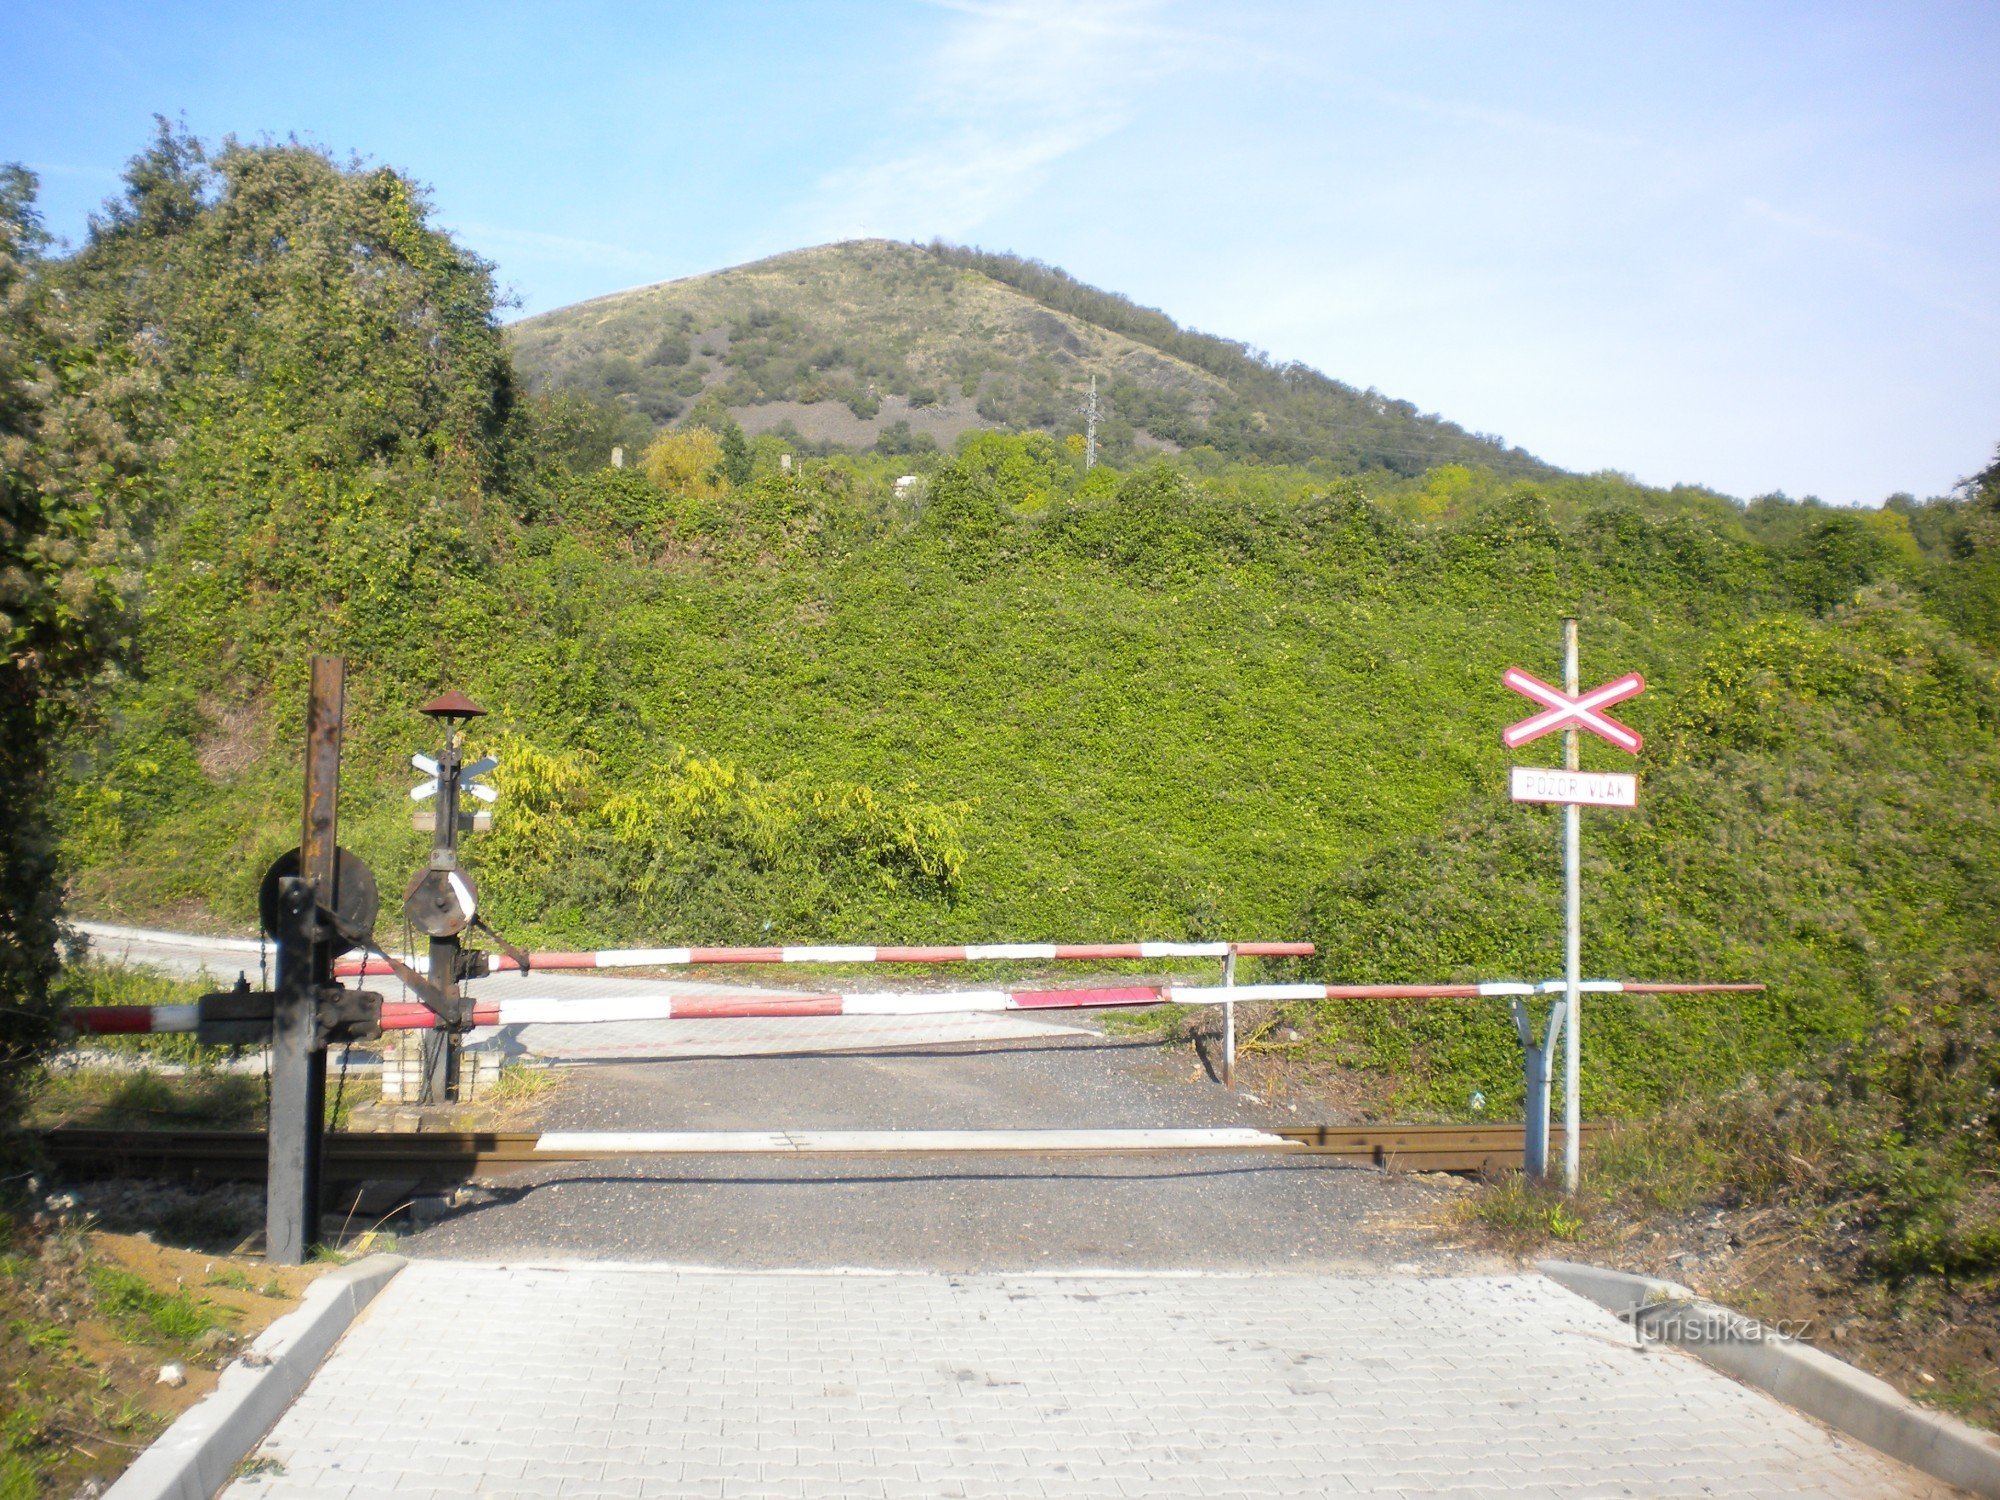 Railway crossing over the road to Radobyl.